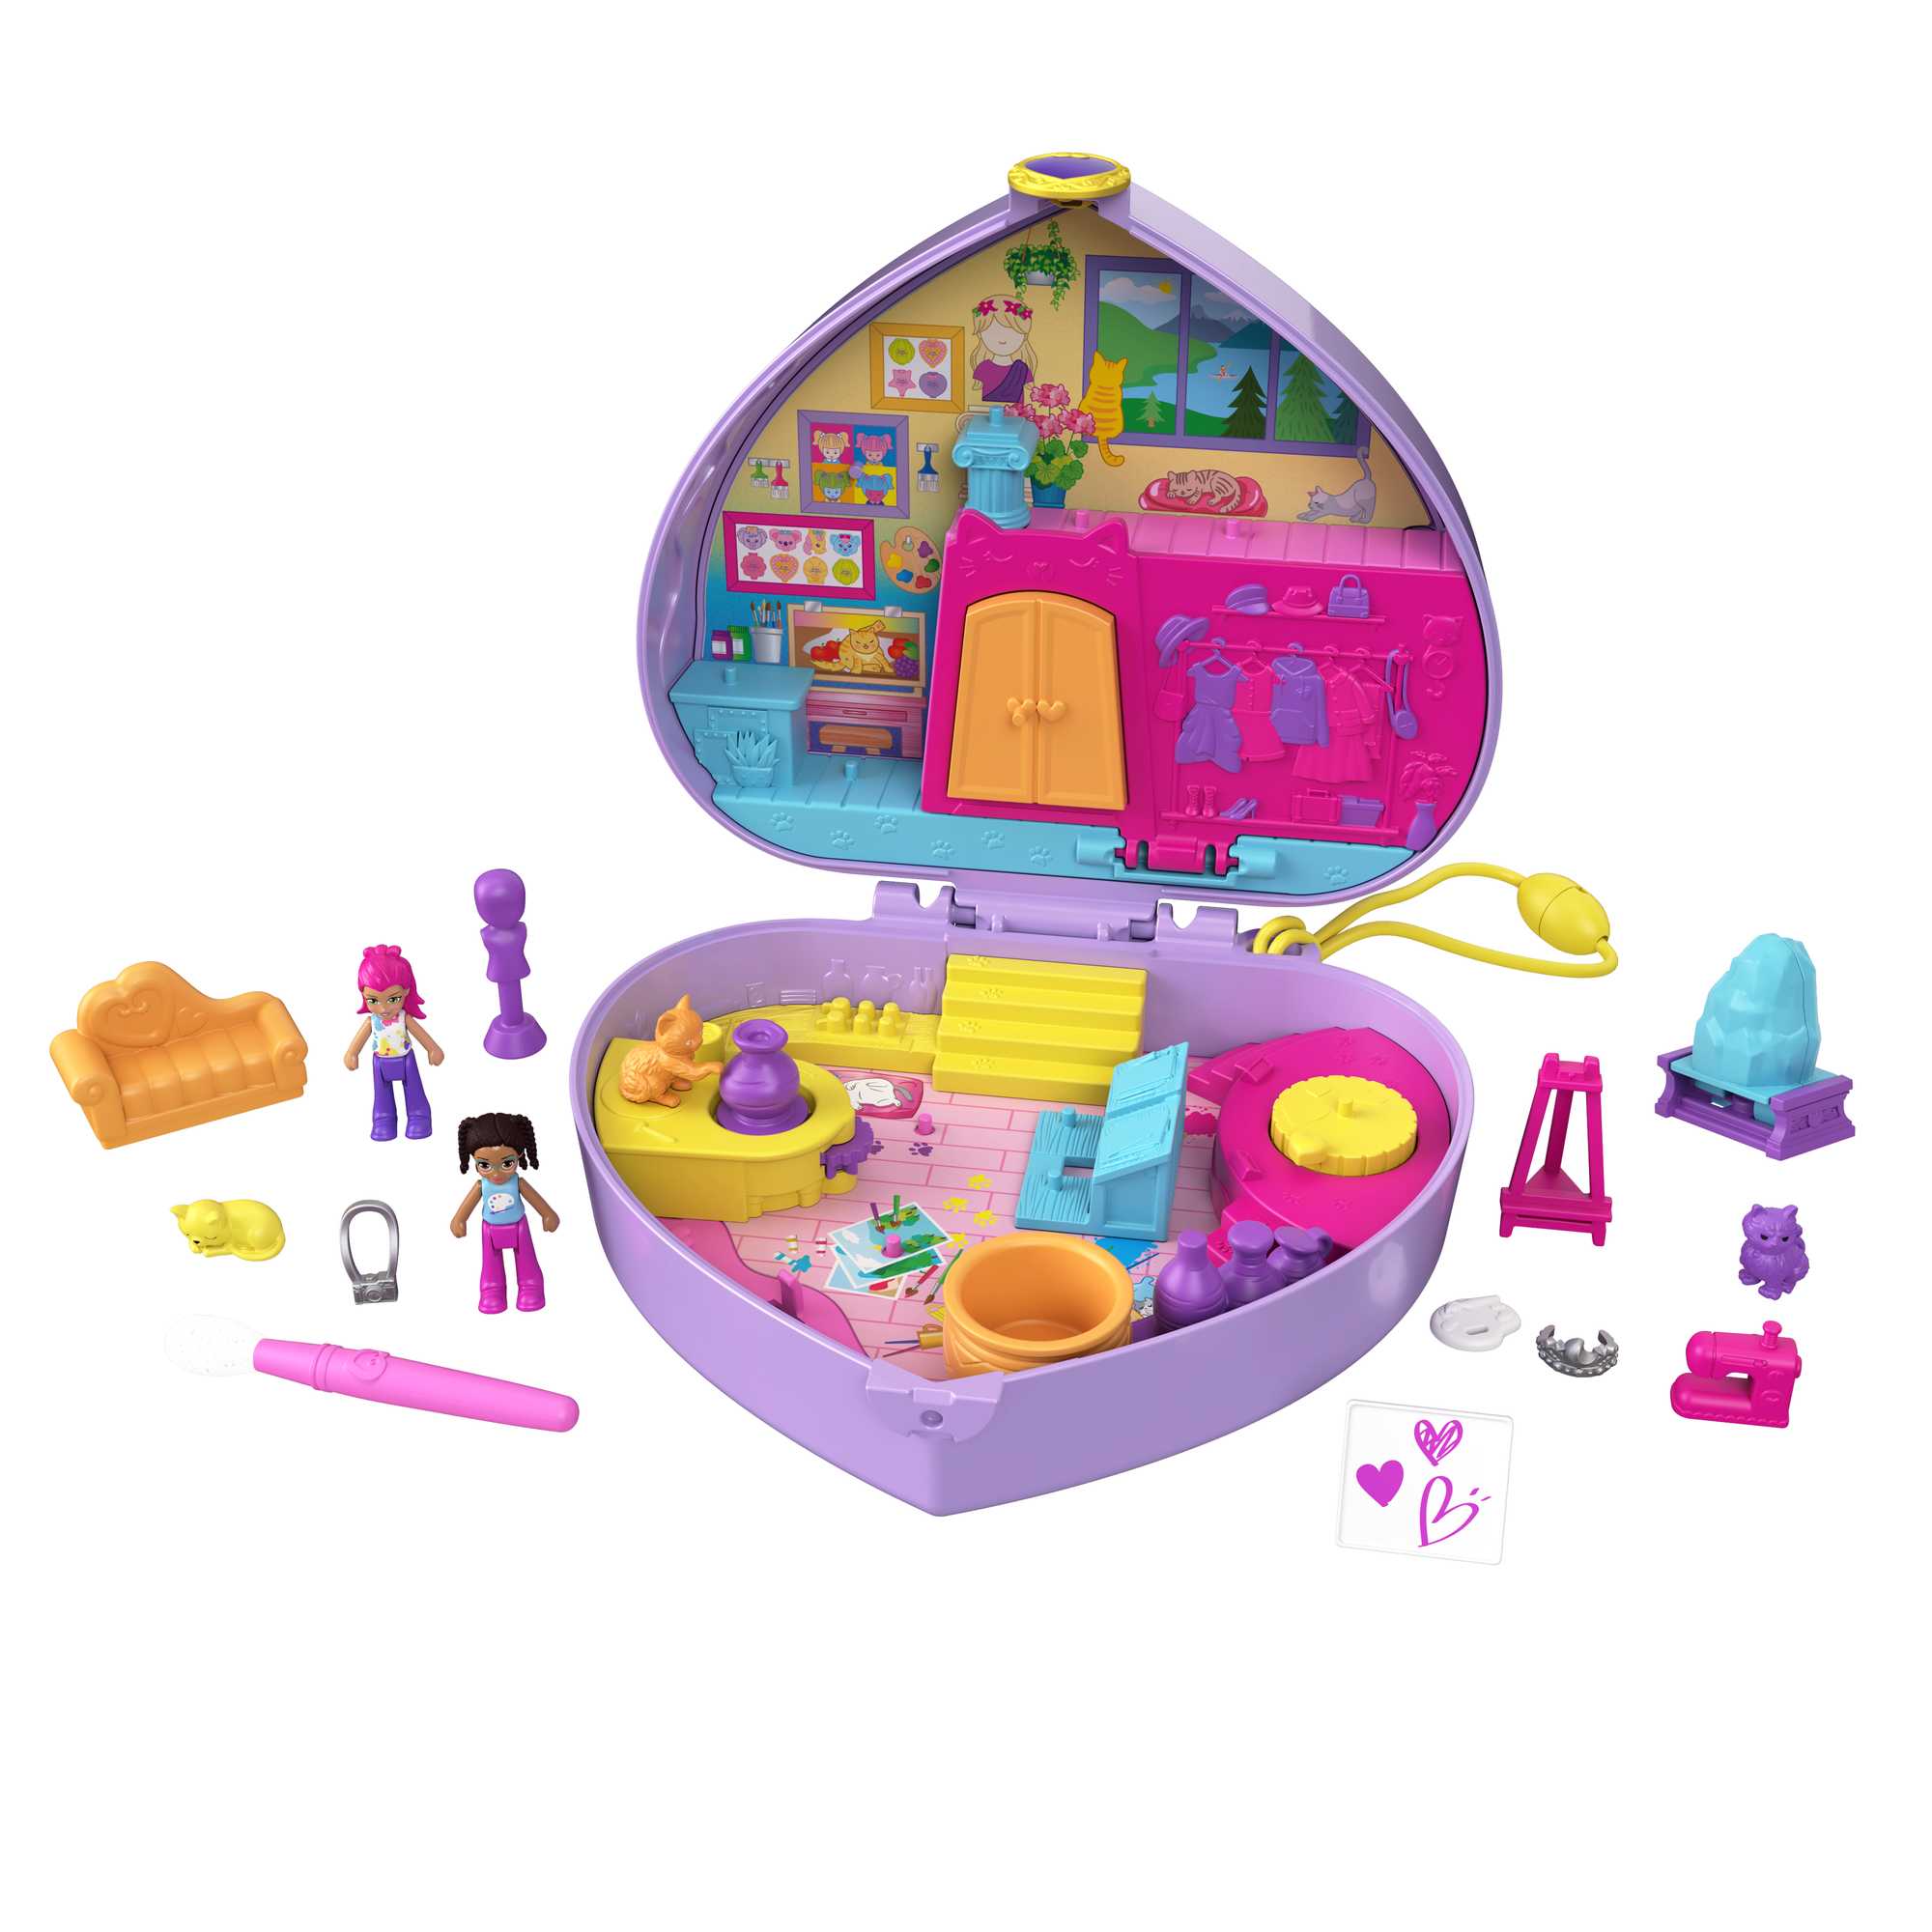 Polly Pocket Starring Shani Art Studio Compact, Micro Shani & Friend Dolls,  5 Reveals, 12 Accessories, Pop & Swap Feature, 4 & Up